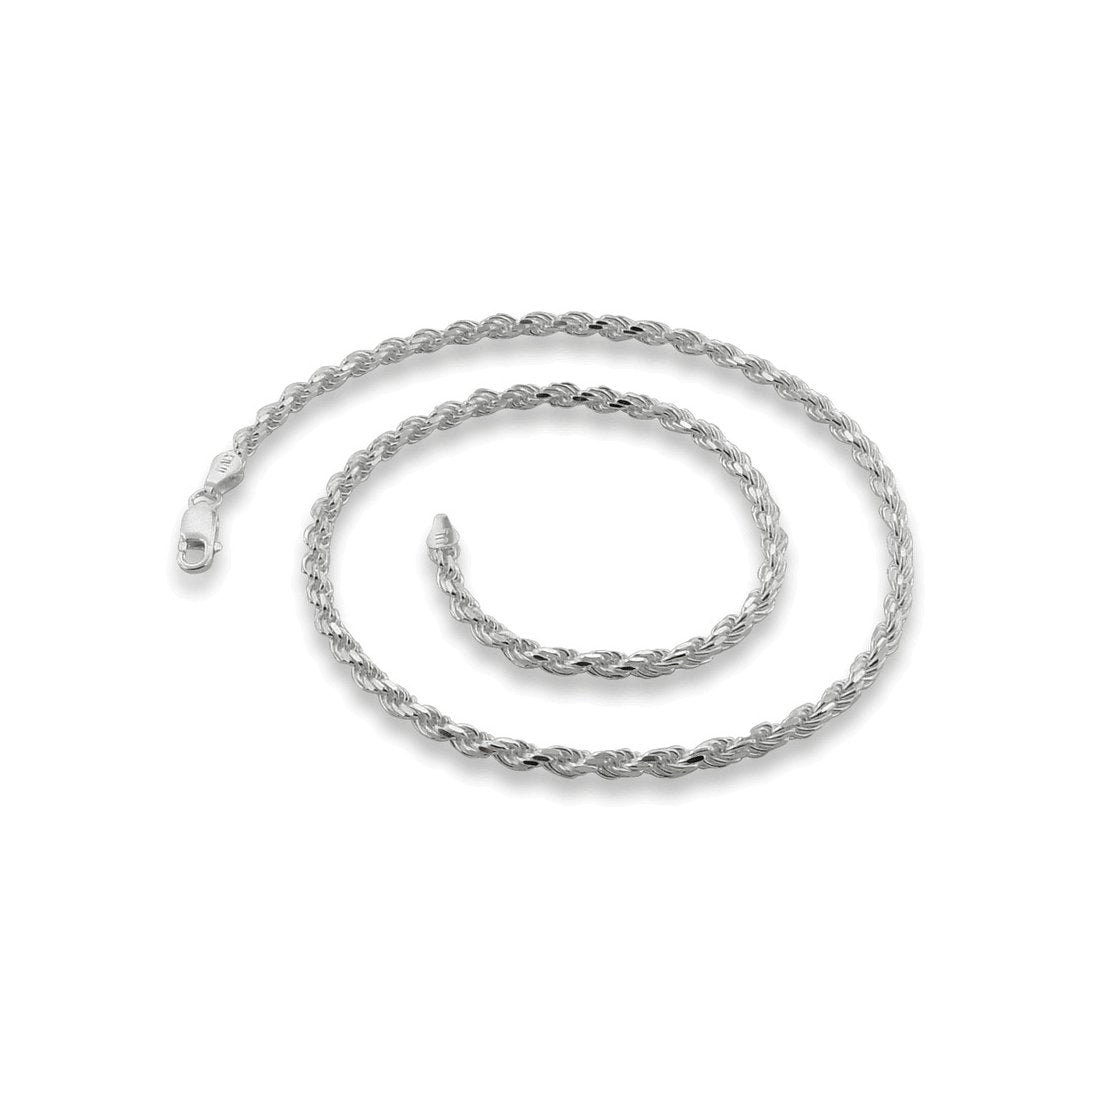 3.0MM 060 Rhodium Plated Rope Chain .925 Sterling Silver Length "8-28" Inches